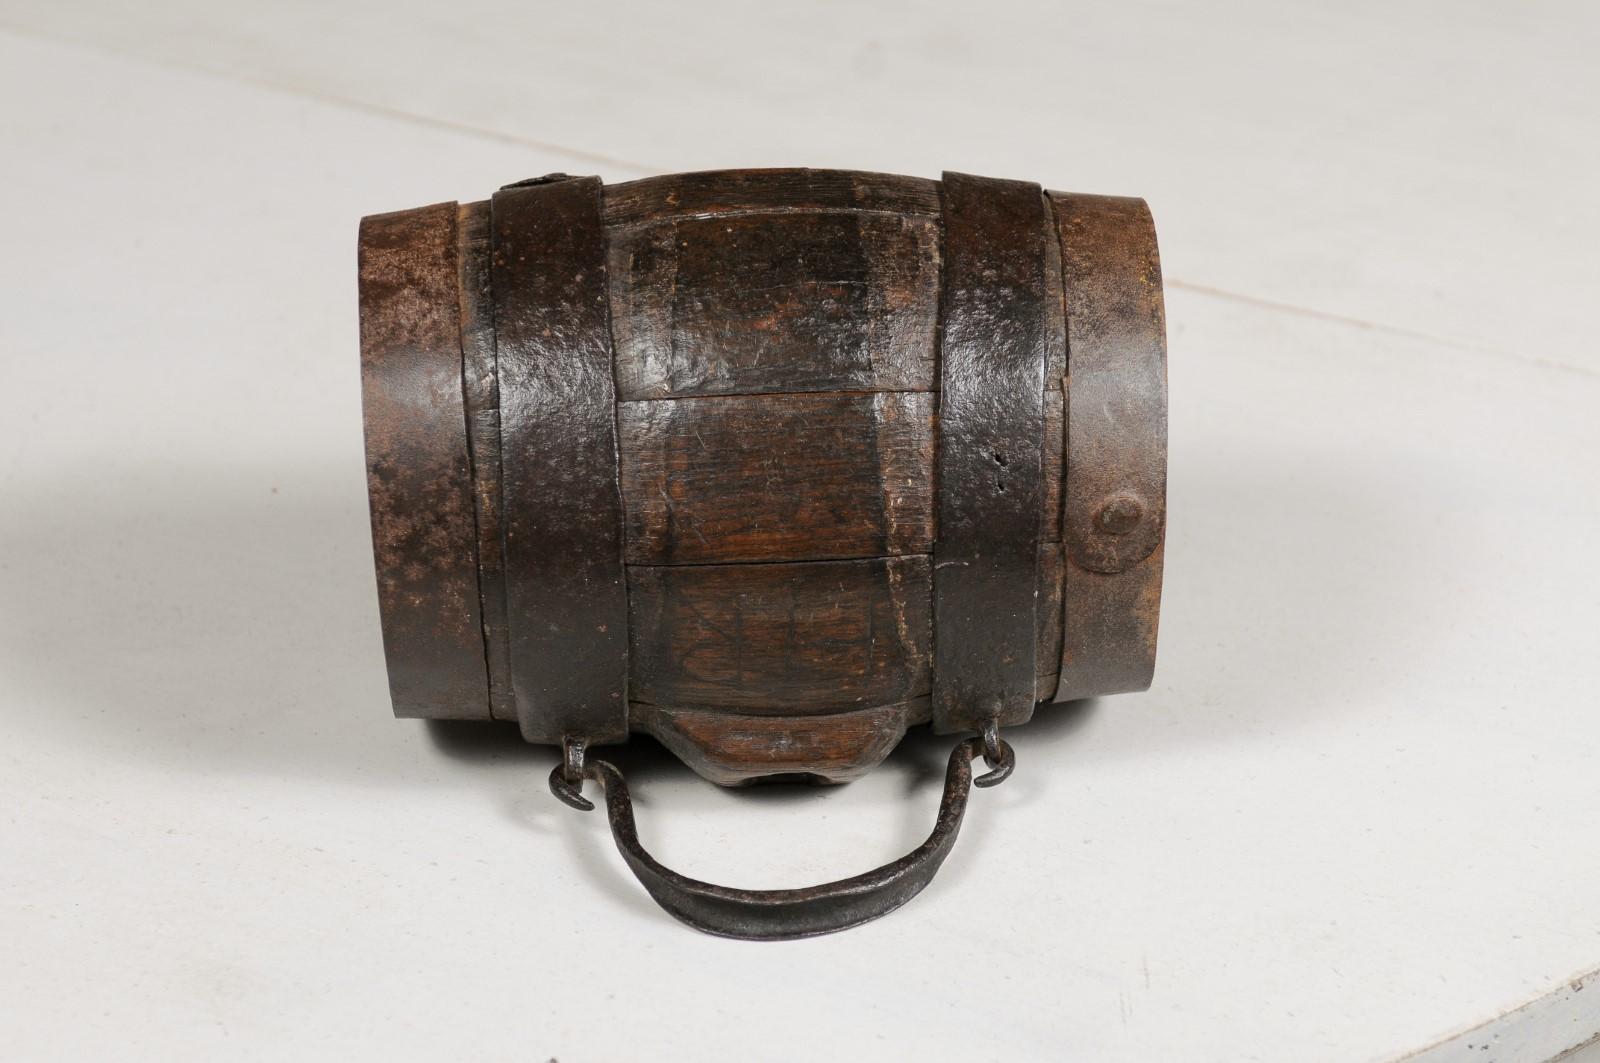 Rustic French 19th Century Petite Decorative Barrel with Iron Handle and Braces For Sale 4